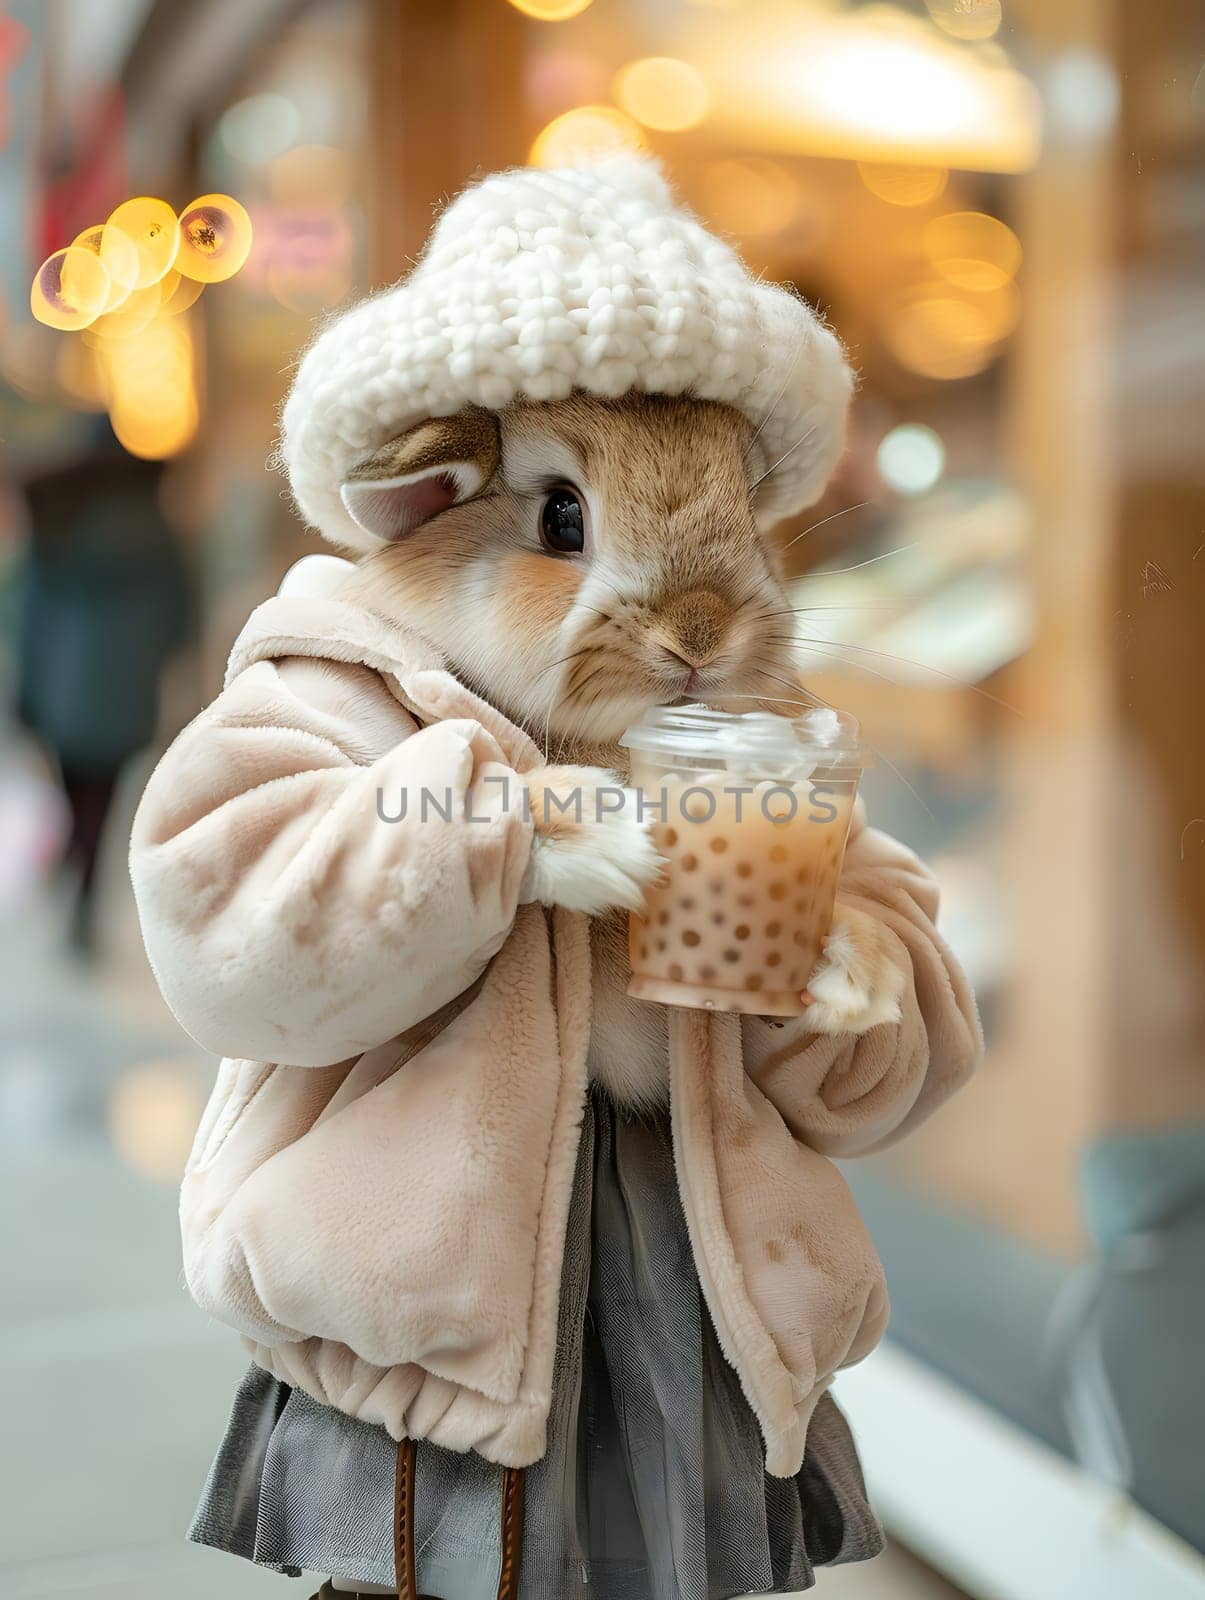 A furry rabbit in winter fur clothing and a cute hat and jacket, holding a cup of bubble tea. A fun and tradition event turned into a toy art